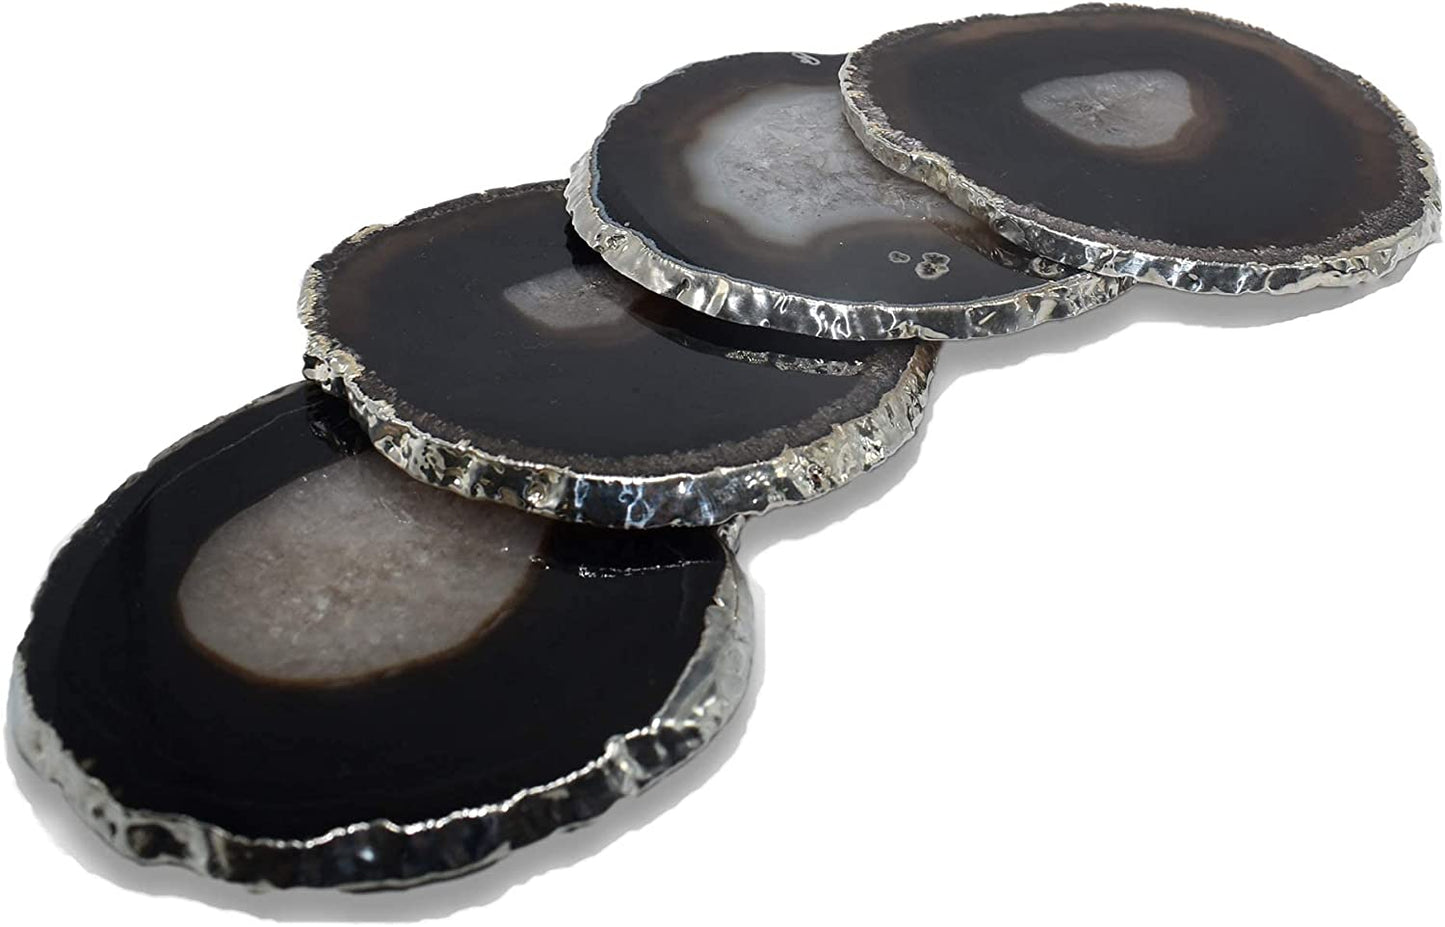 Premium Black Silver Rimmed Agate Coasters - Set of 4, Genuine Stone Table Mats for Dining & Drinks Coffee Table & Kitchen Geode Decor Non-Toxic 3.5-4” Diameter